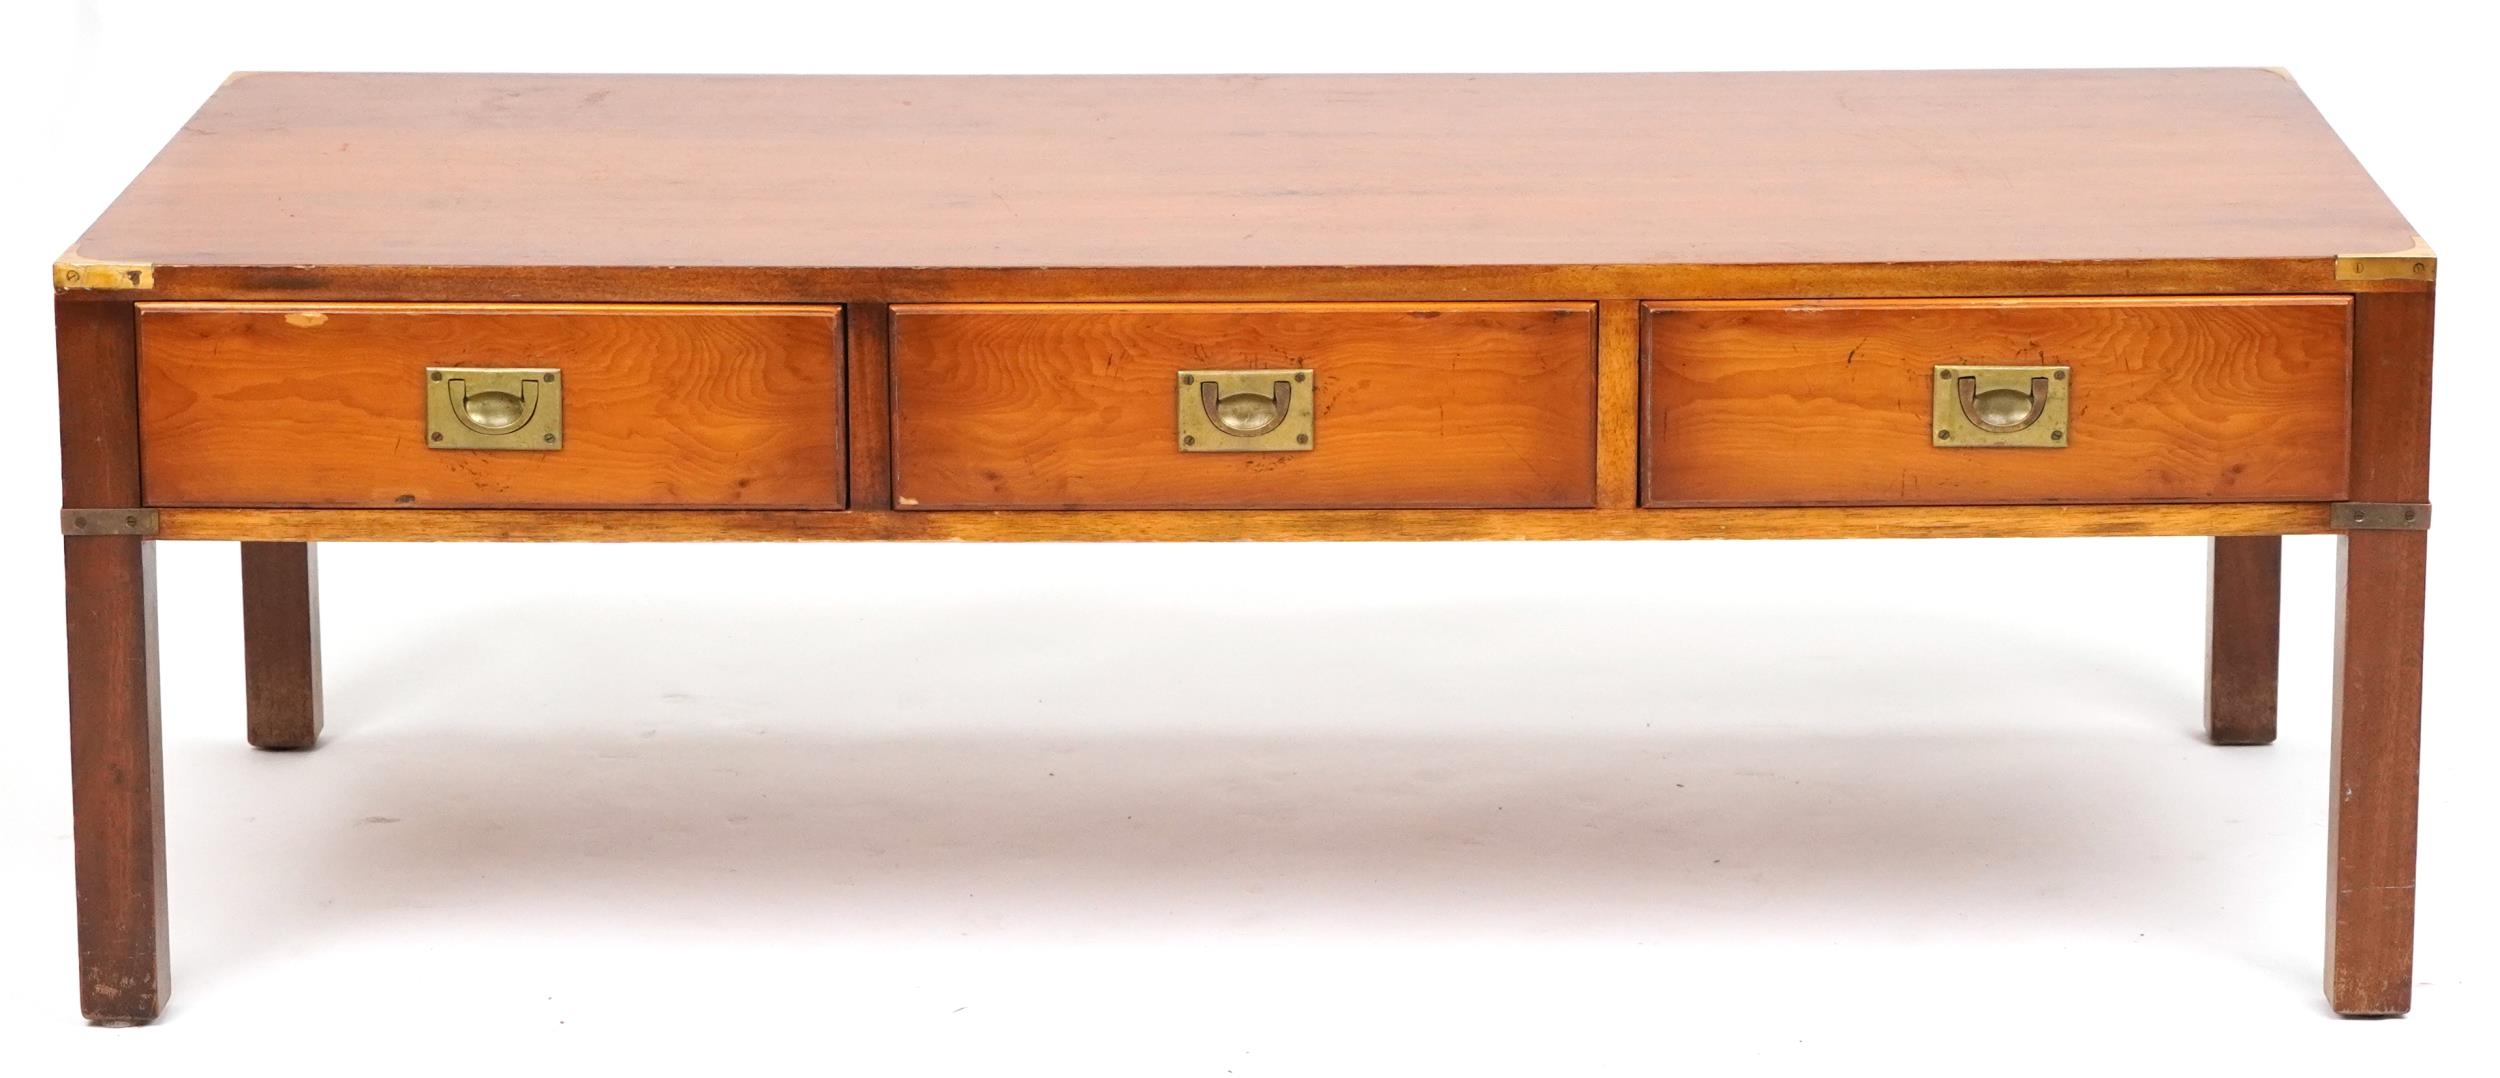 Military interest yew wood campaign style coffee table with three frieze drawers and brass mounts, - Image 4 of 4